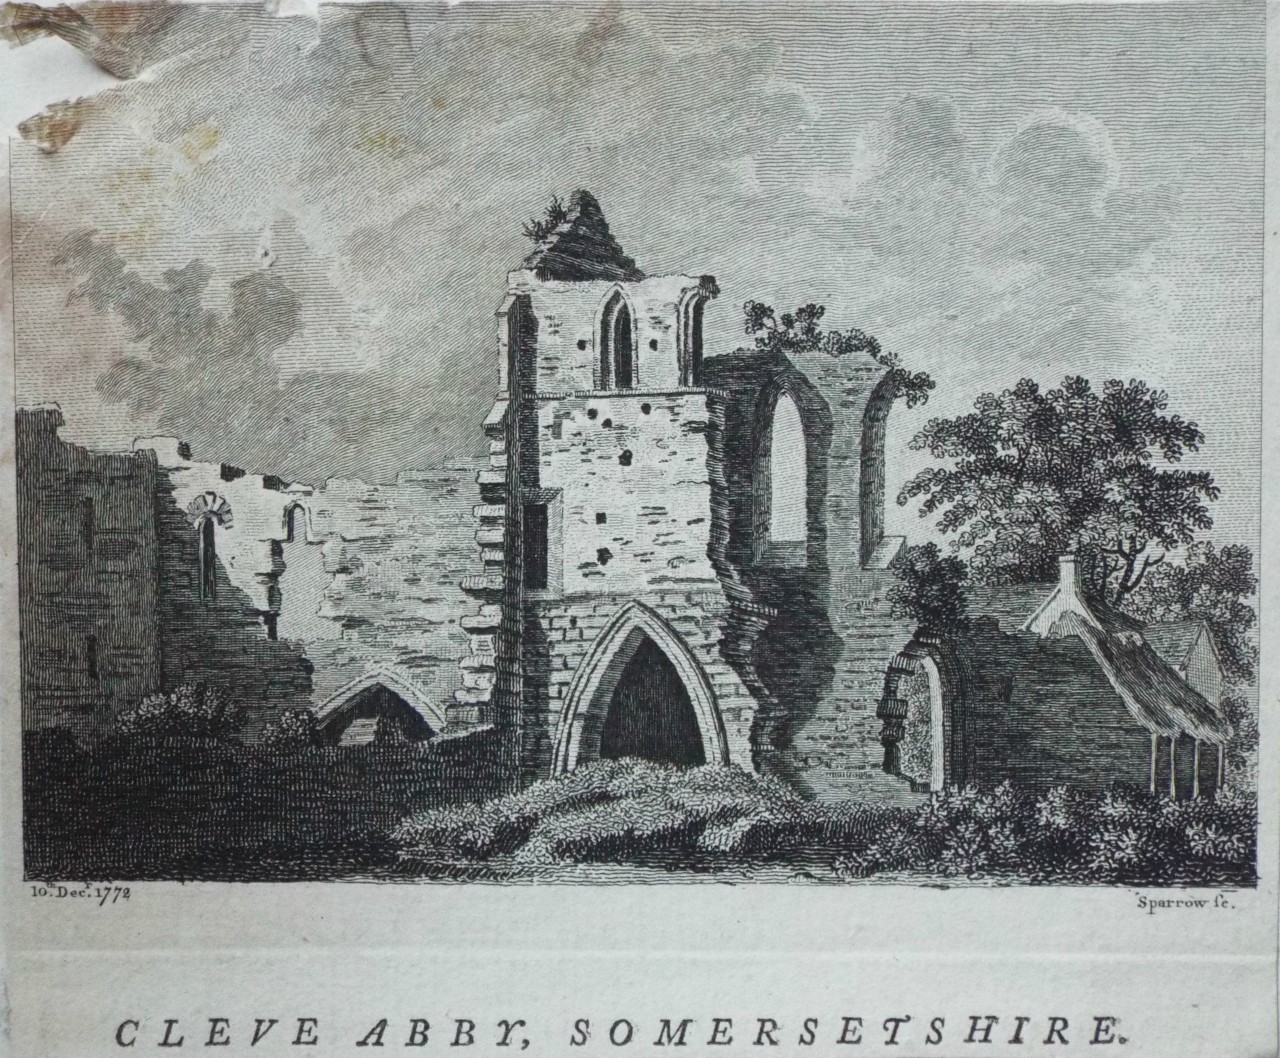 Print - Cleve Abbey, Somersetshire.